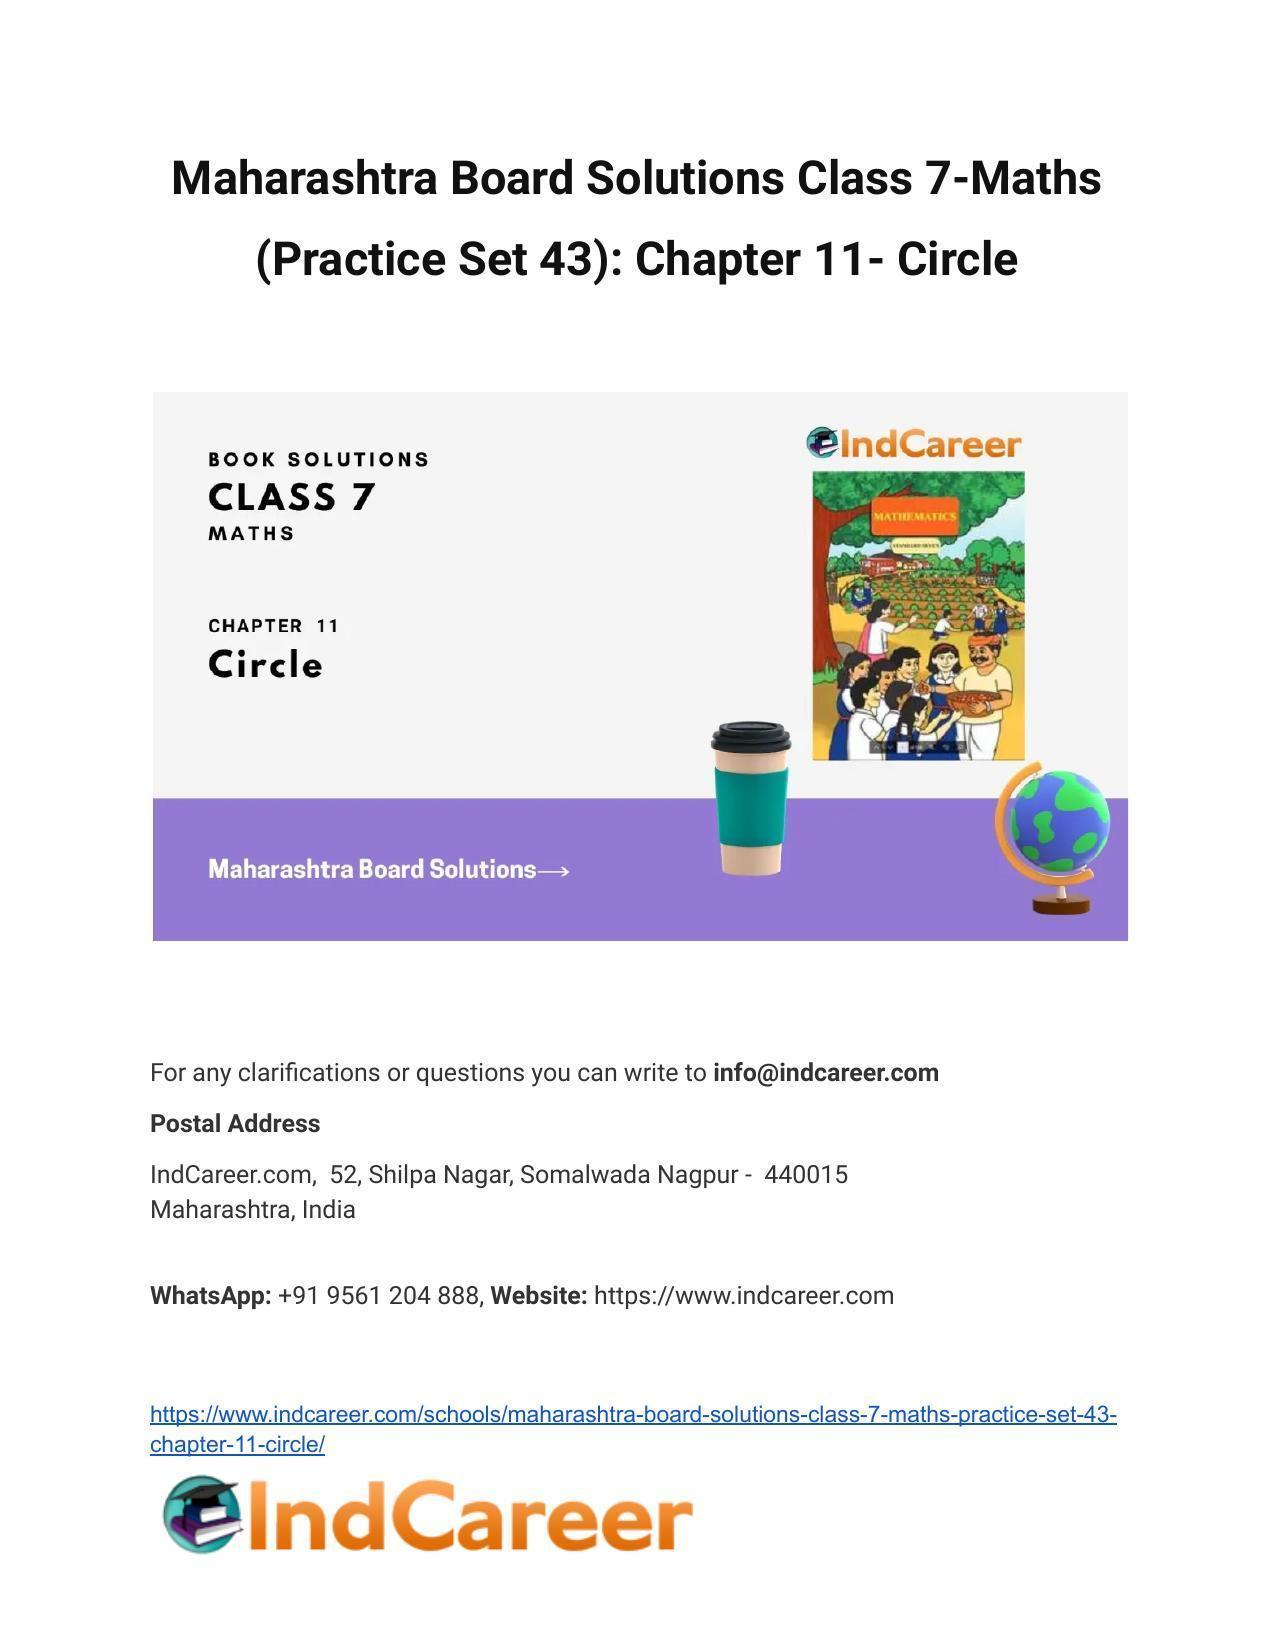 Maharashtra Board Solutions Class 7-Maths (Practice Set 43): Chapter 11- Circle - Page 1